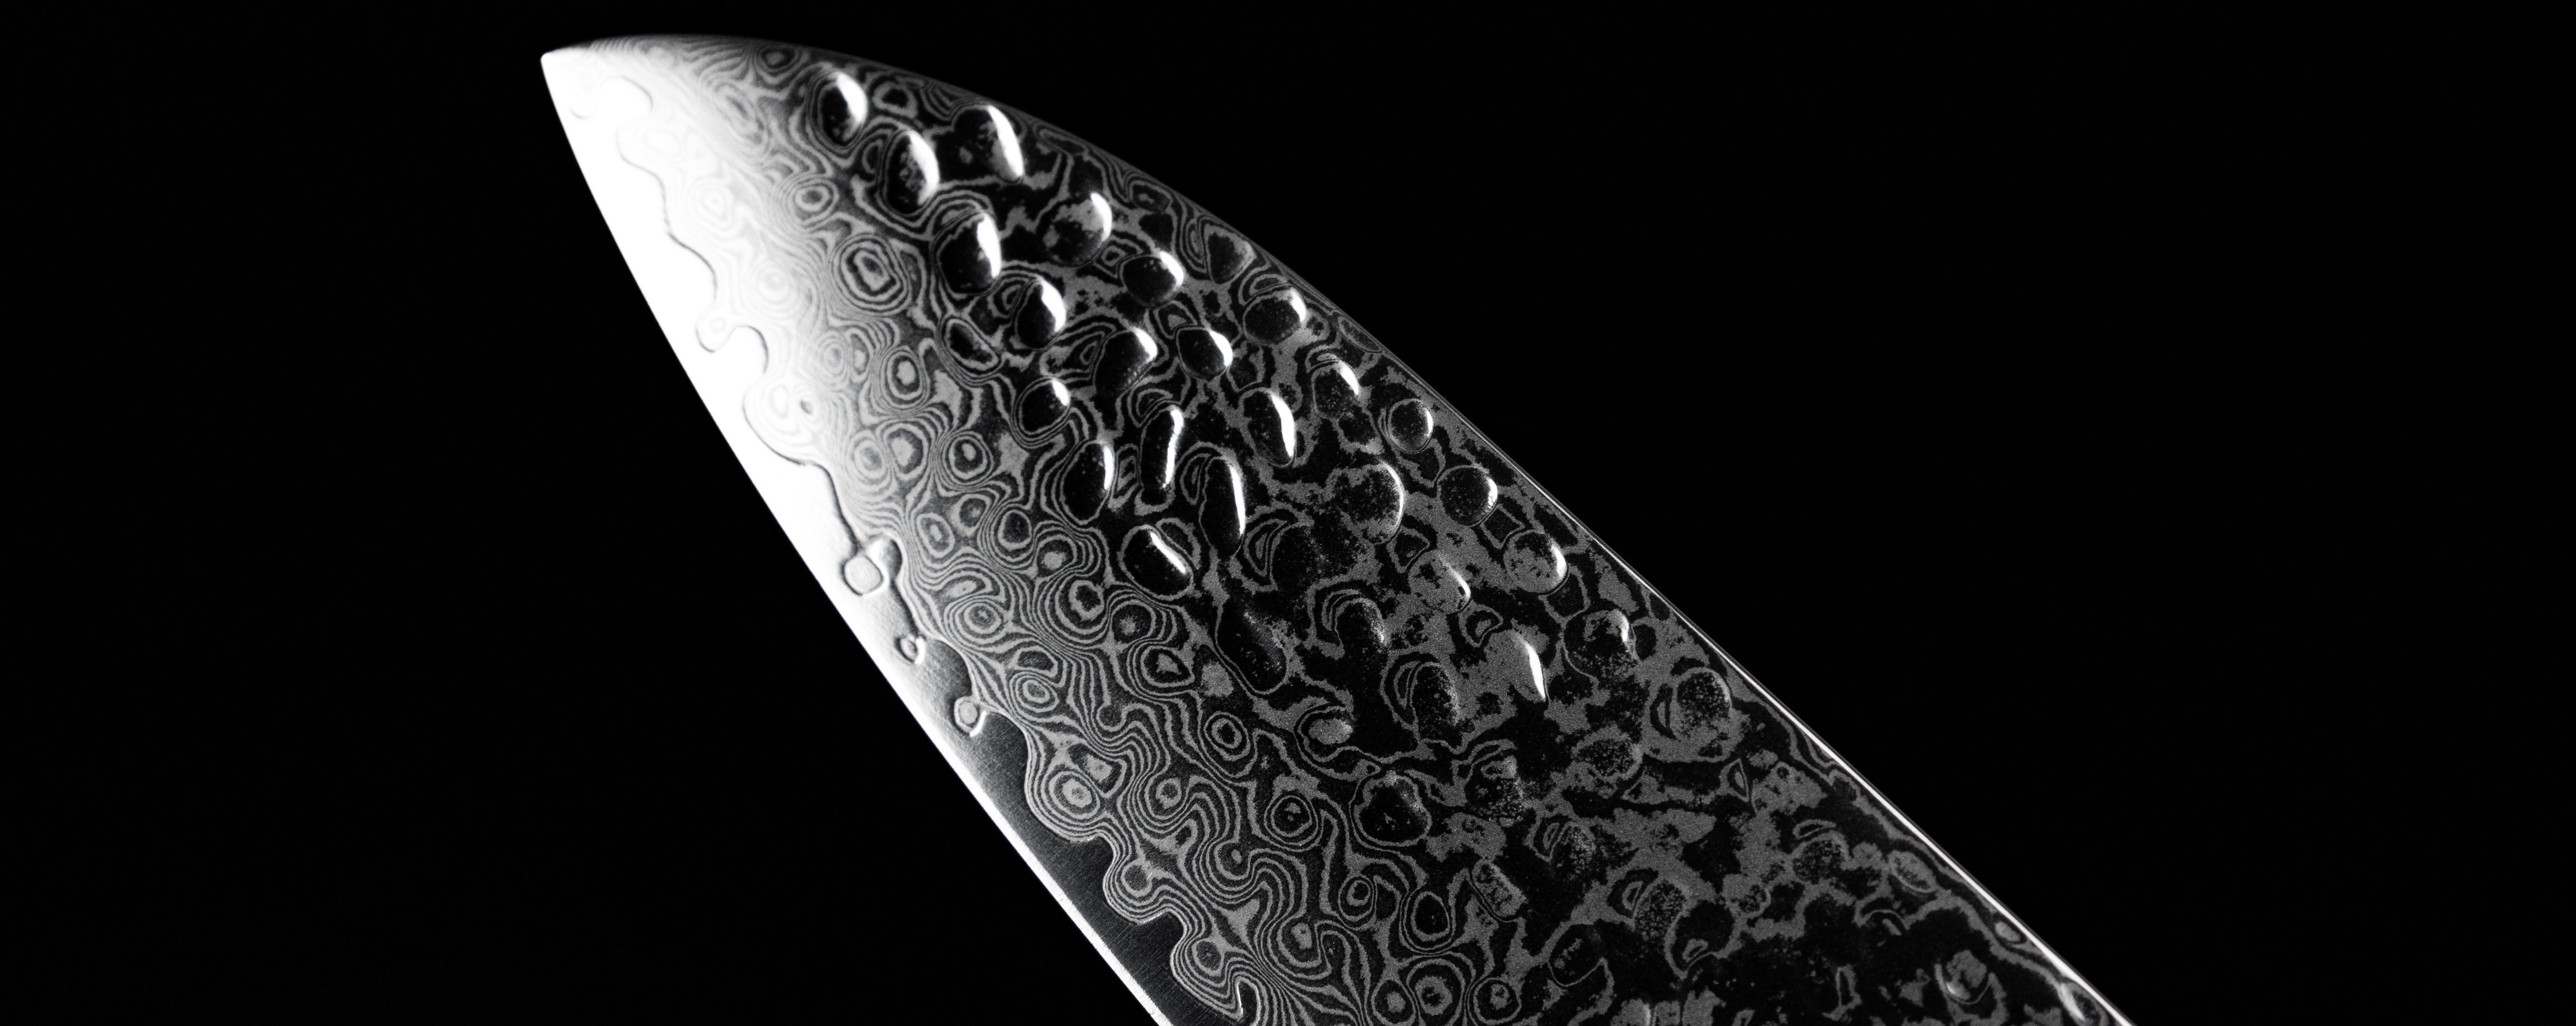 zoom on the kotai santoku pakka collection to appreciate the features of the damascus steel, displayed on a black background